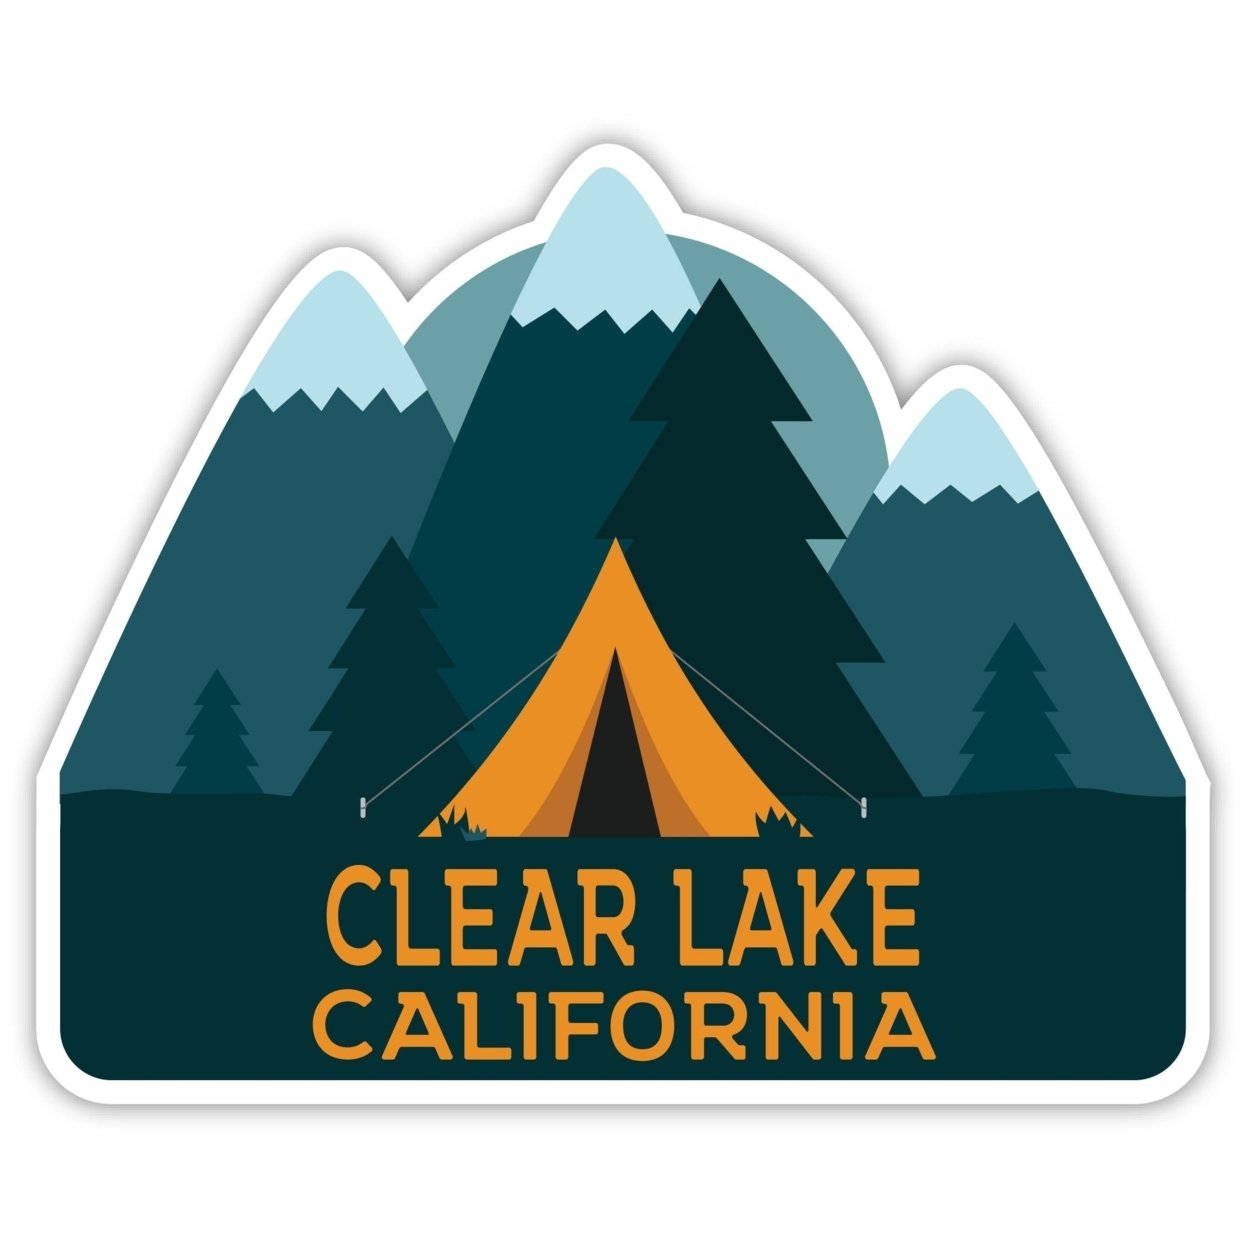 Clear Lake California Souvenir Decorative Stickers (Choose Theme And Size) - 4-Pack, 10-Inch, Tent